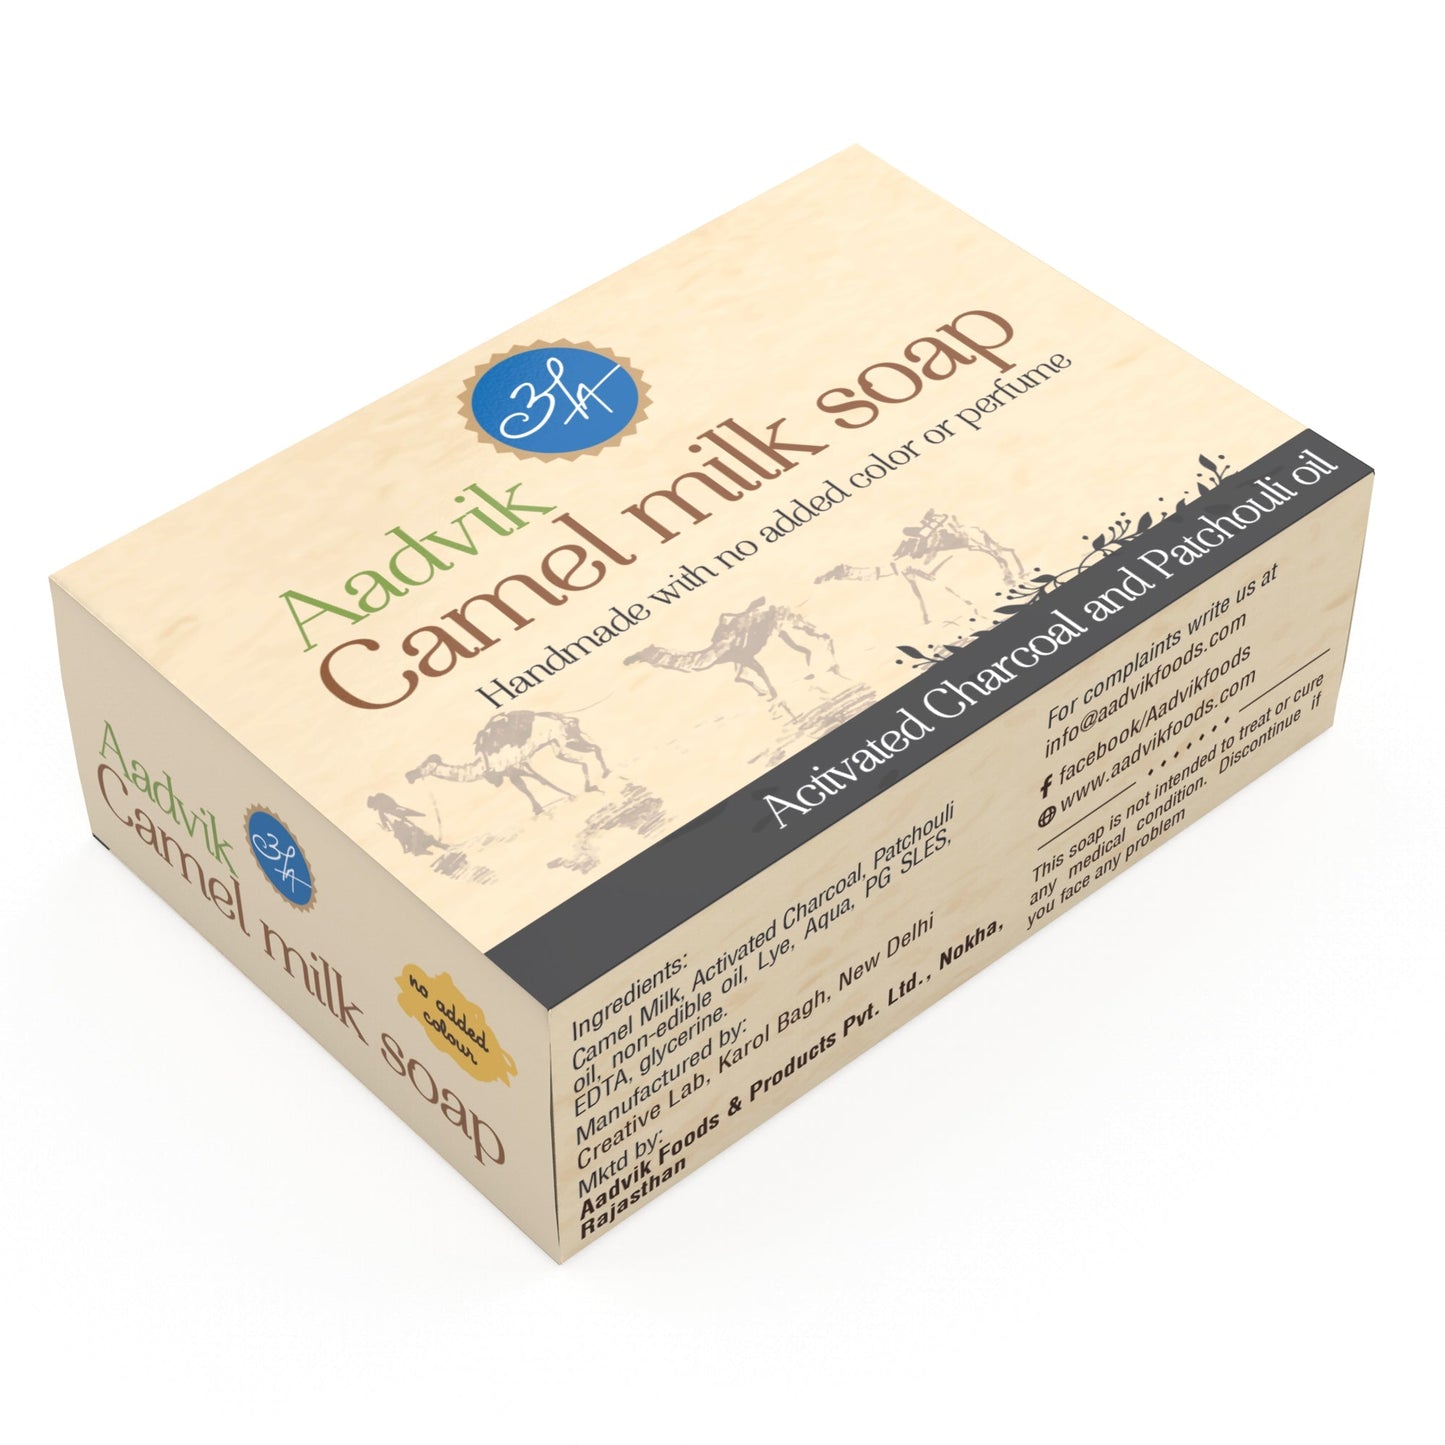 Camel Milk Soap । With Charcoal Patchouli Oil | 100gm